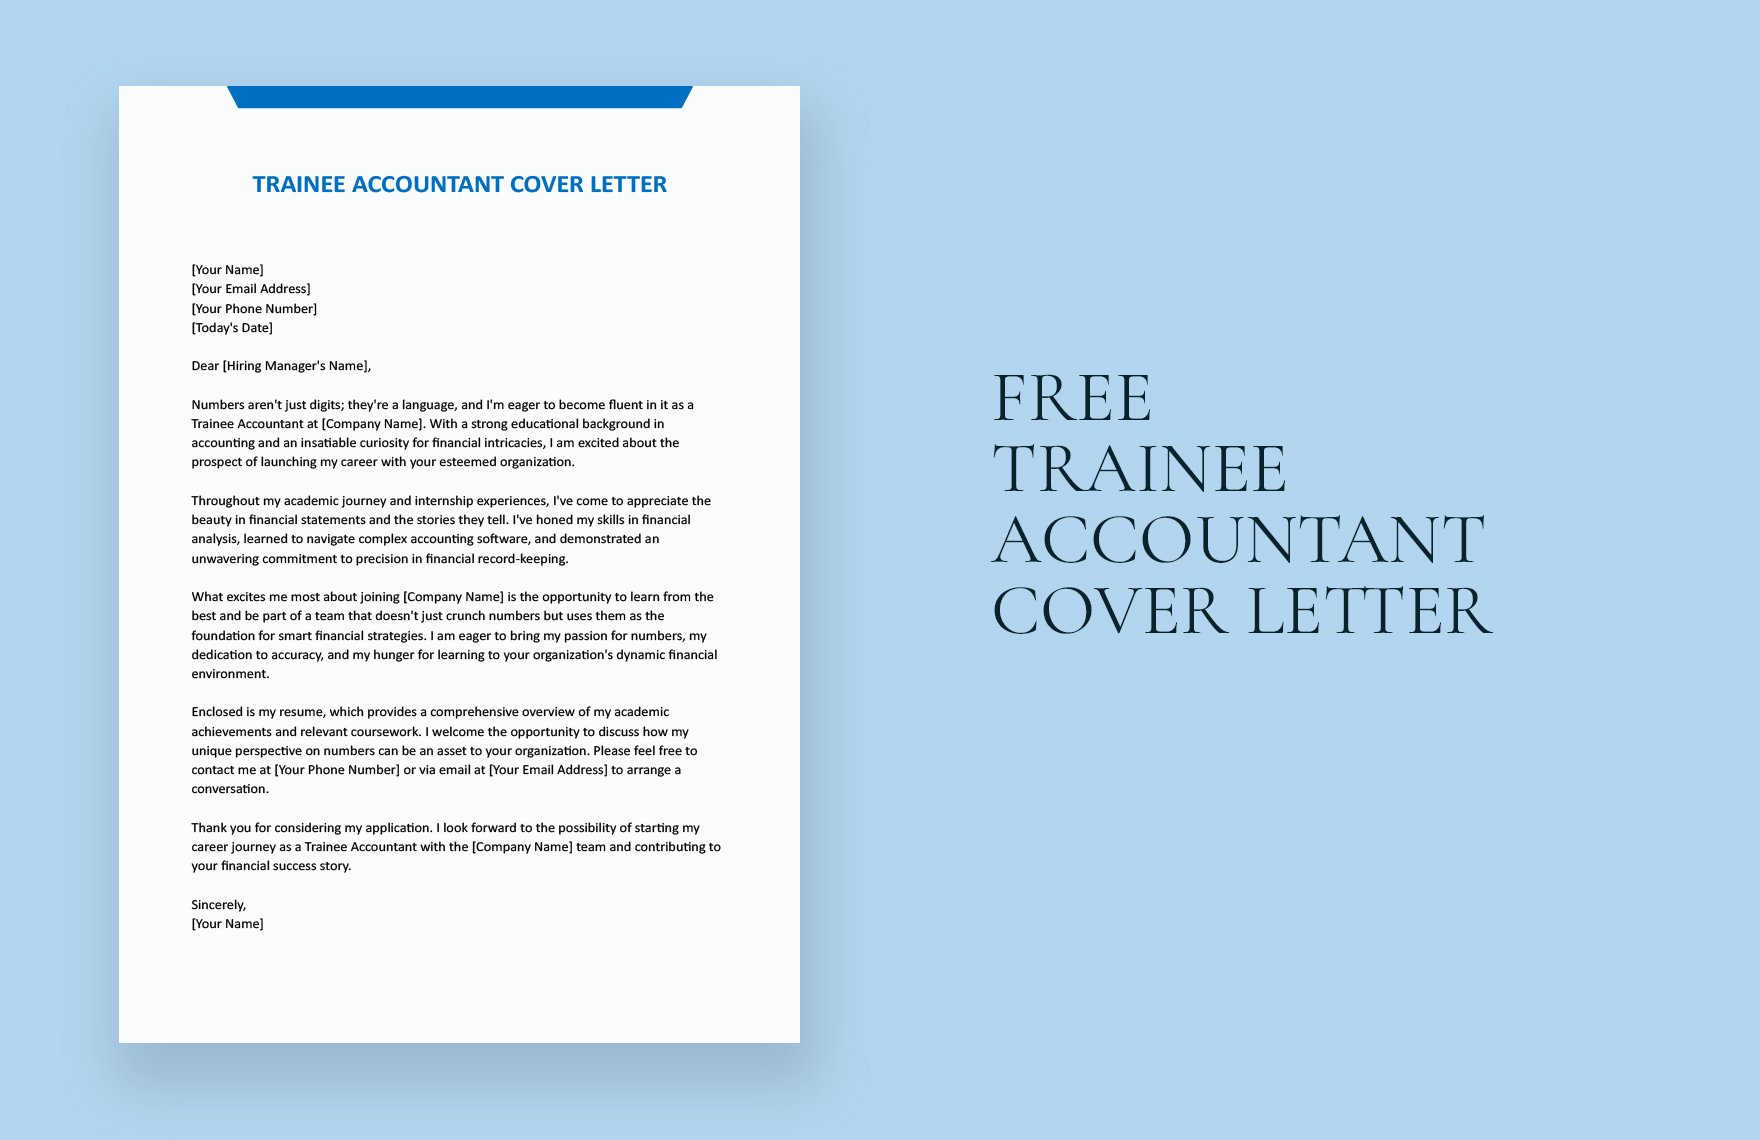 Trainee Accountant Cover Letter in Word, Google Docs